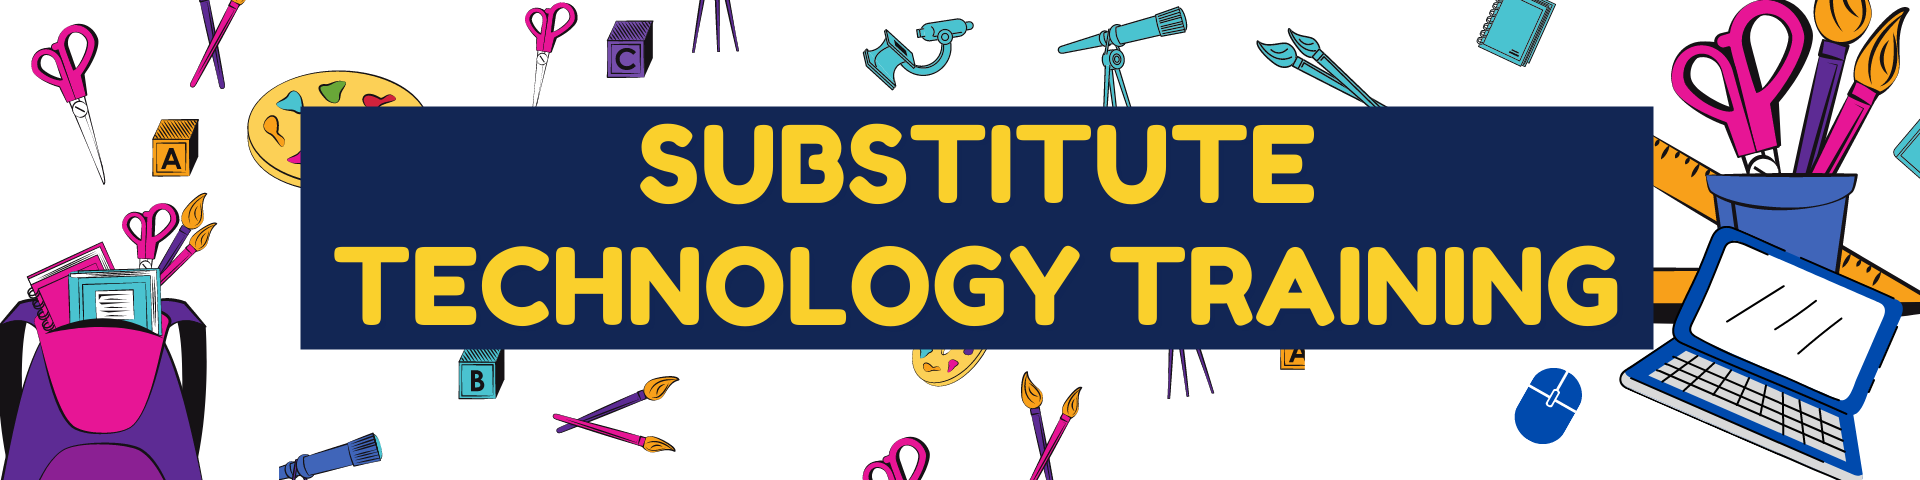 Substitute-Technology-Training-banner.png